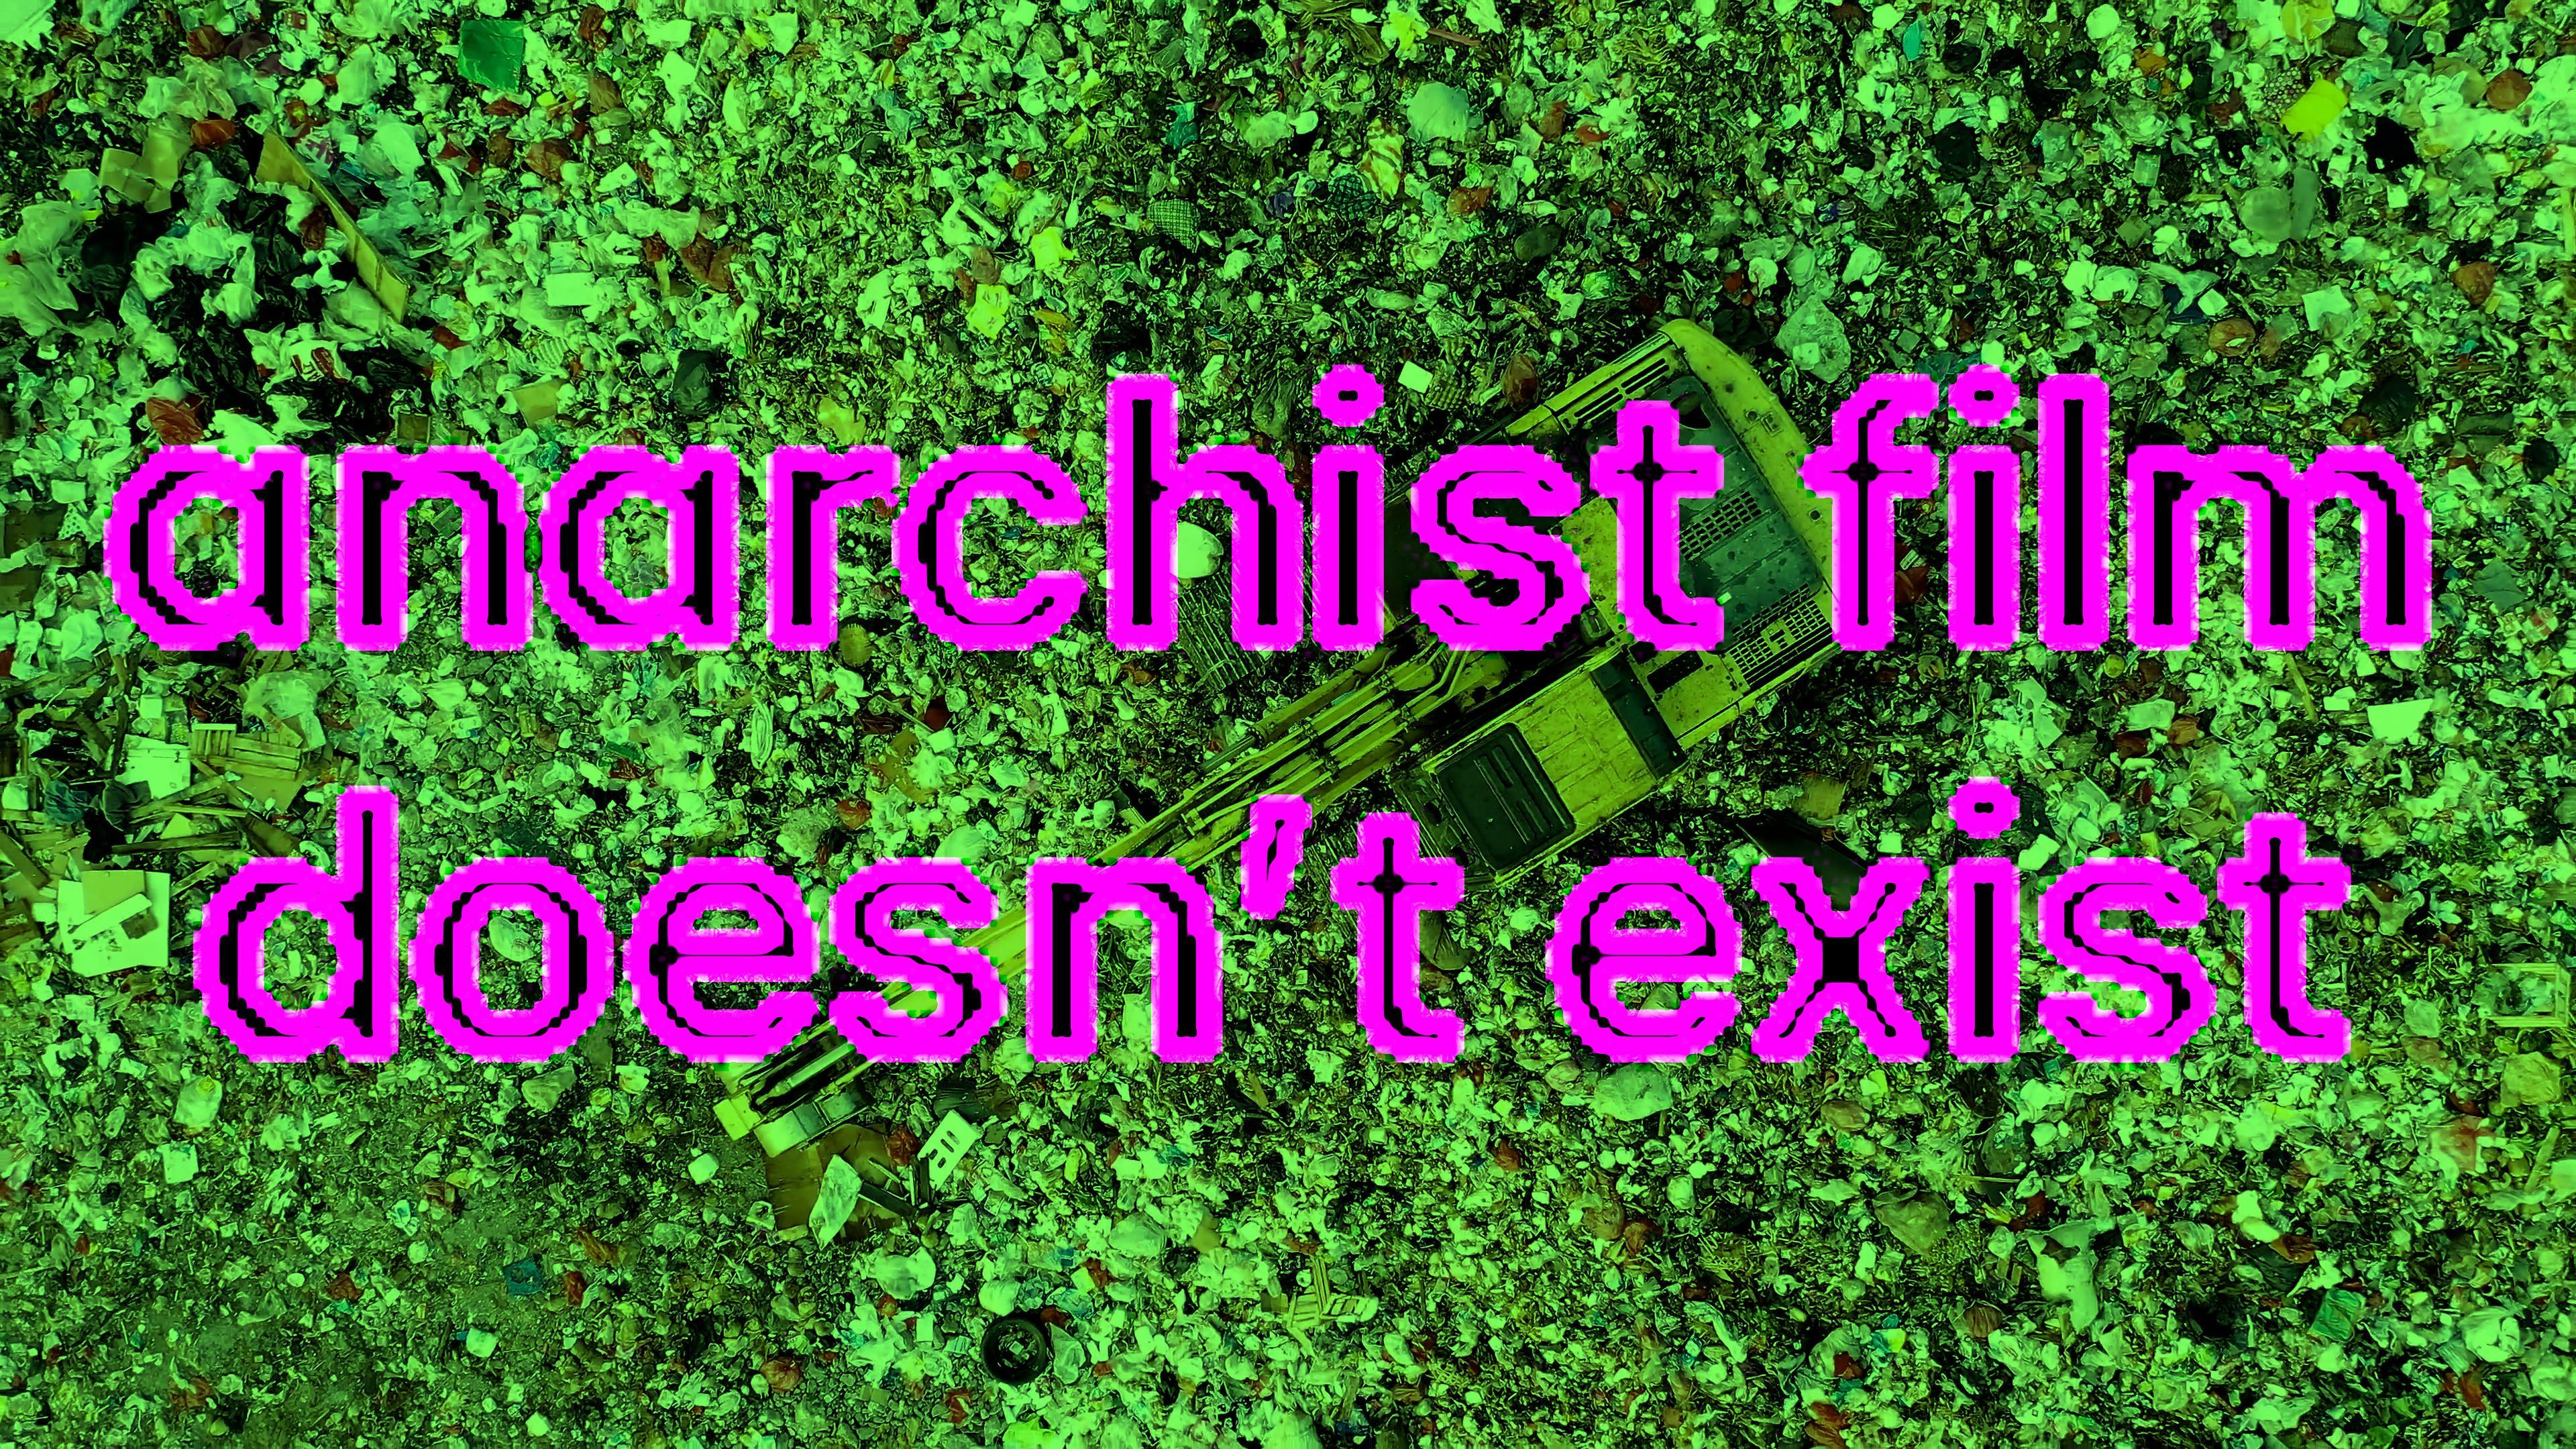 a-f-anarchist-film-doesn-t-exist-1.jpg